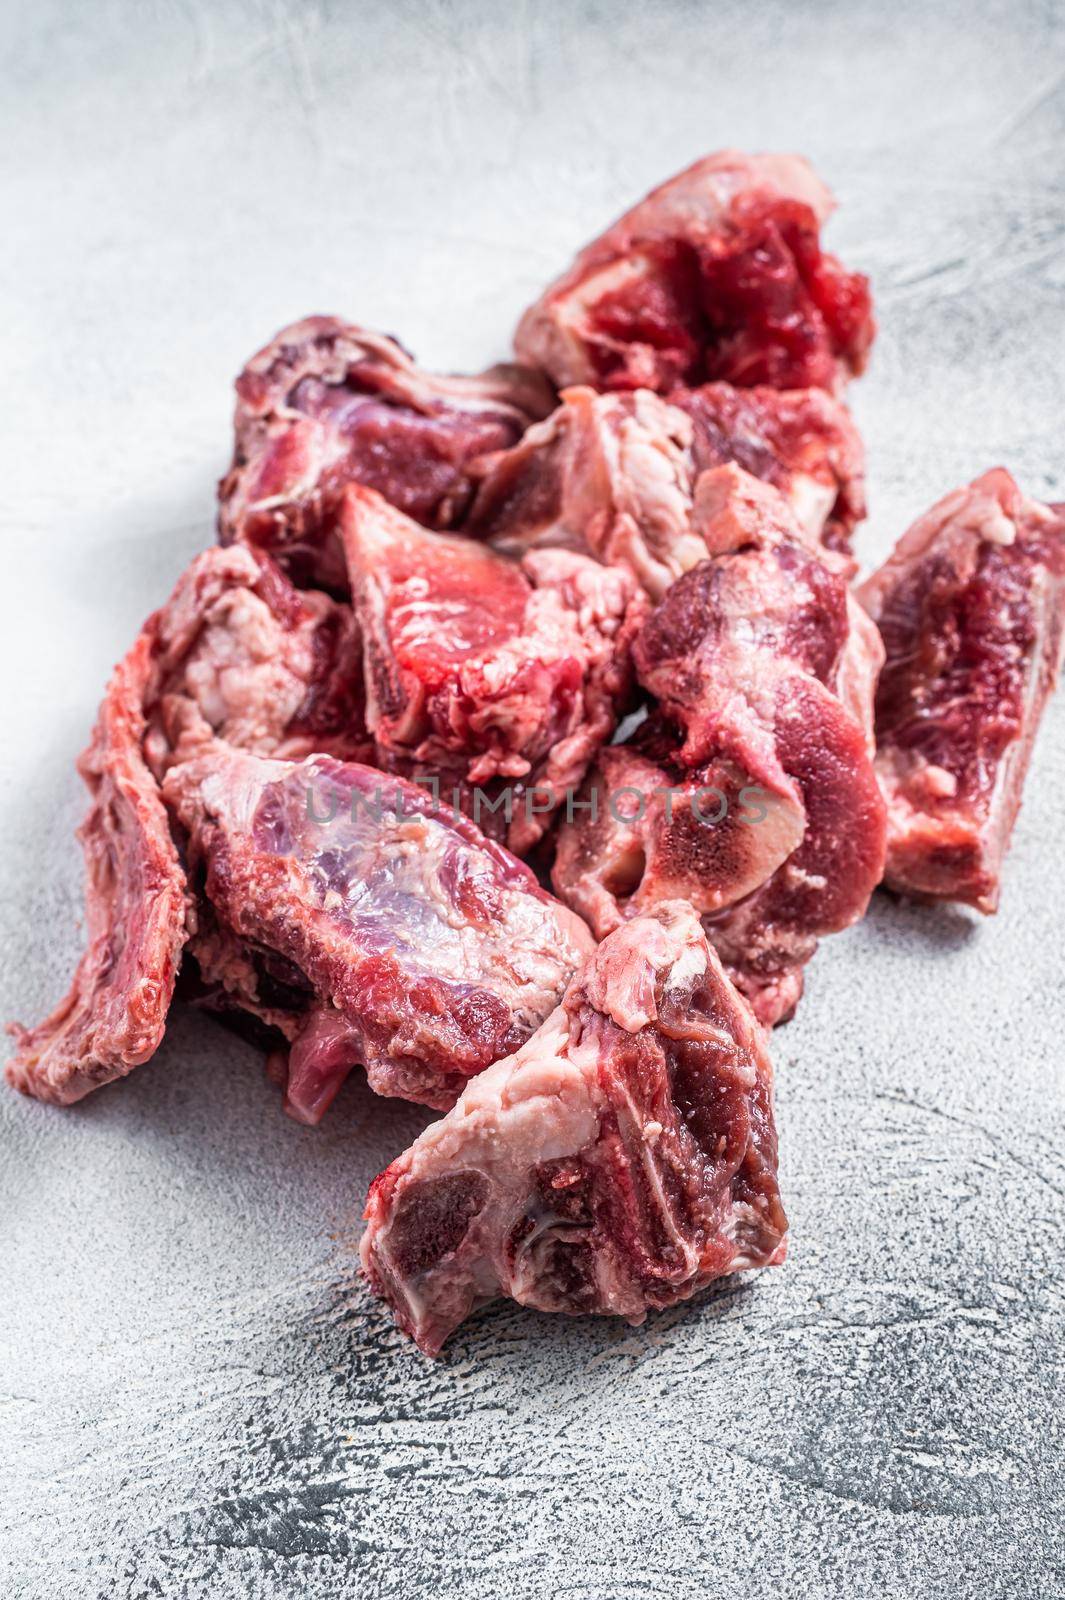 Raw lamb meat stew cuts with bone. White background. Top view.